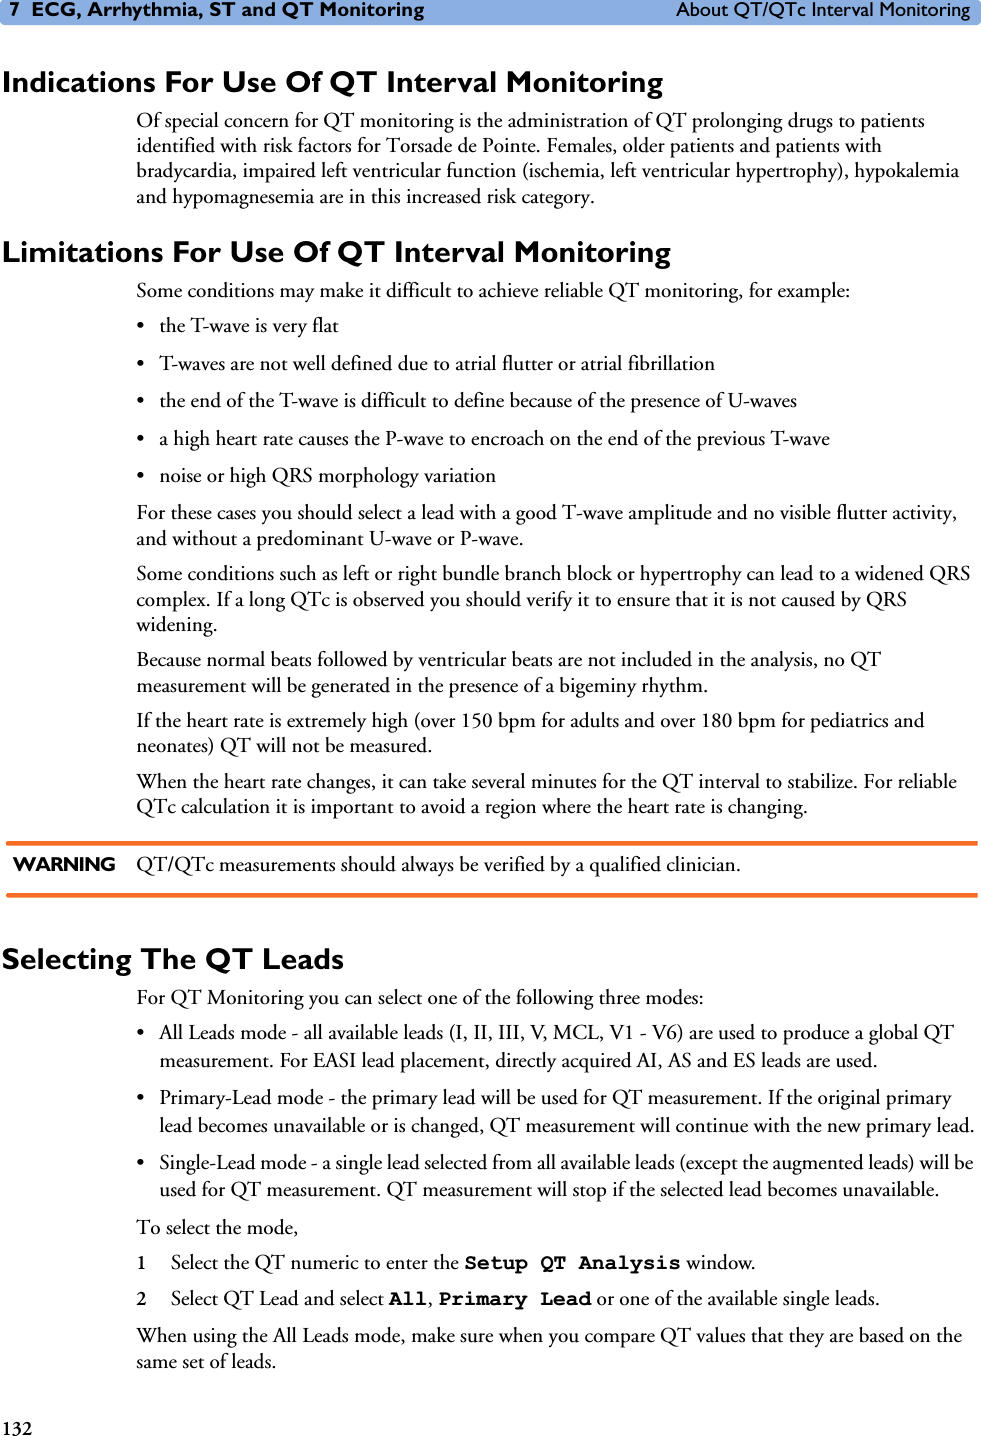 7 ECG, Arrhythmia, ST and QT Monitoring About QT/QTc Interval Monitoring132Indications For Use Of QT Interval MonitoringOf special concern for QT monitoring is the administration of QT prolonging drugs to patients identified with risk factors for Torsade de Pointe. Females, older patients and patients with bradycardia, impaired left ventricular function (ischemia, left ventricular hypertrophy), hypokalemia and hypomagnesemia are in this increased risk category. Limitations For Use Of QT Interval MonitoringSome conditions may make it difficult to achieve reliable QT monitoring, for example: • the T-wave is very flat• T-waves are not well defined due to atrial flutter or atrial fibrillation• the end of the T-wave is difficult to define because of the presence of U-waves• a high heart rate causes the P-wave to encroach on the end of the previous T-wave• noise or high QRS morphology variationFor these cases you should select a lead with a good T-wave amplitude and no visible flutter activity, and without a predominant U-wave or P-wave. Some conditions such as left or right bundle branch block or hypertrophy can lead to a widened QRS complex. If a long QTc is observed you should verify it to ensure that it is not caused by QRS widening.Because normal beats followed by ventricular beats are not included in the analysis, no QT measurement will be generated in the presence of a bigeminy rhythm. If the heart rate is extremely high (over 150 bpm for adults and over 180 bpm for pediatrics and neonates) QT will not be measured. When the heart rate changes, it can take several minutes for the QT interval to stabilize. For reliable QTc calculation it is important to avoid a region where the heart rate is changing. WARNING QT/QTc measurements should always be verified by a qualified clinician.Selecting The QT LeadsFor QT Monitoring you can select one of the following three modes:• All Leads mode - all available leads (I, II, III, V, MCL, V1 - V6) are used to produce a global QT measurement. For EASI lead placement, directly acquired AI, AS and ES leads are used. • Primary-Lead mode - the primary lead will be used for QT measurement. If the original primary lead becomes unavailable or is changed, QT measurement will continue with the new primary lead.• Single-Lead mode - a single lead selected from all available leads (except the augmented leads) will be used for QT measurement. QT measurement will stop if the selected lead becomes unavailable. To select the mode, 1Select the QT numeric to enter the Setup QT Analysis window.2Select QT Lead and select All, Primary Lead or one of the available single leads.When using the All Leads mode, make sure when you compare QT values that they are based on the same set of leads. 